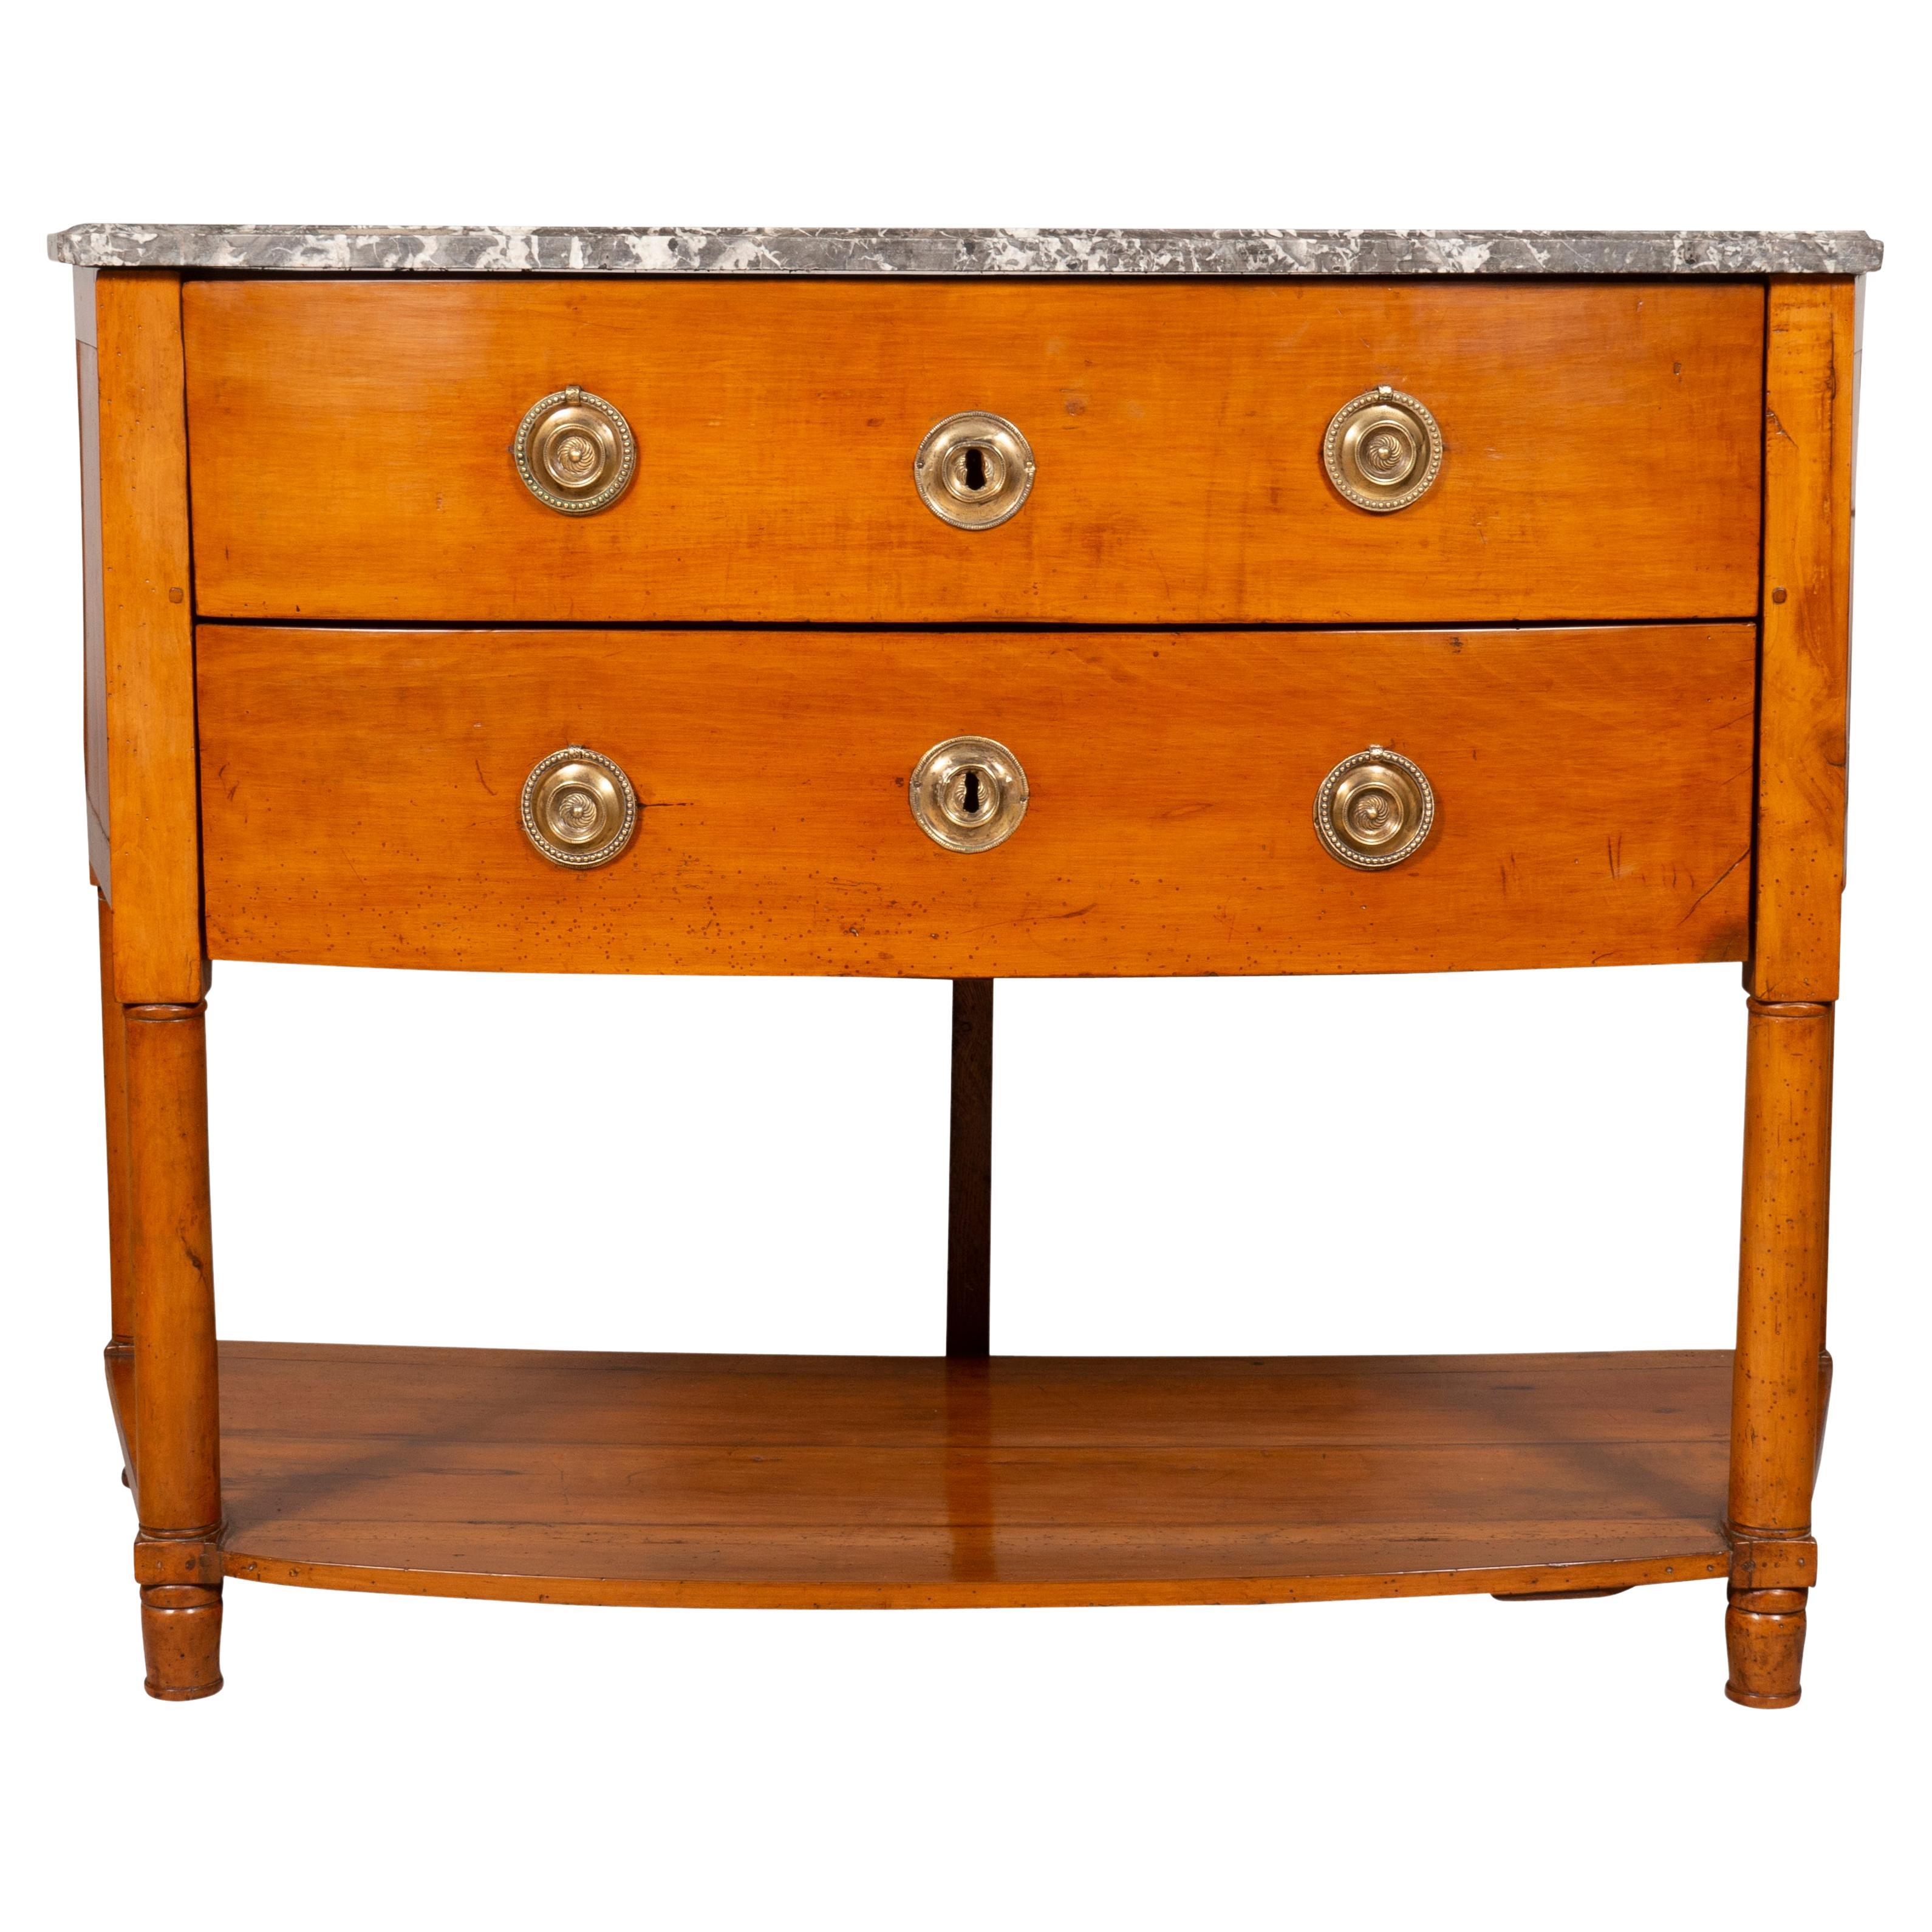 With original bowed St Anne marble top over two conforming drawers with round brass handles, lower conforming shelf and ending on turned feet. From the estate of William Hodgins noted interior designers Manchester Ma summer home. With key.